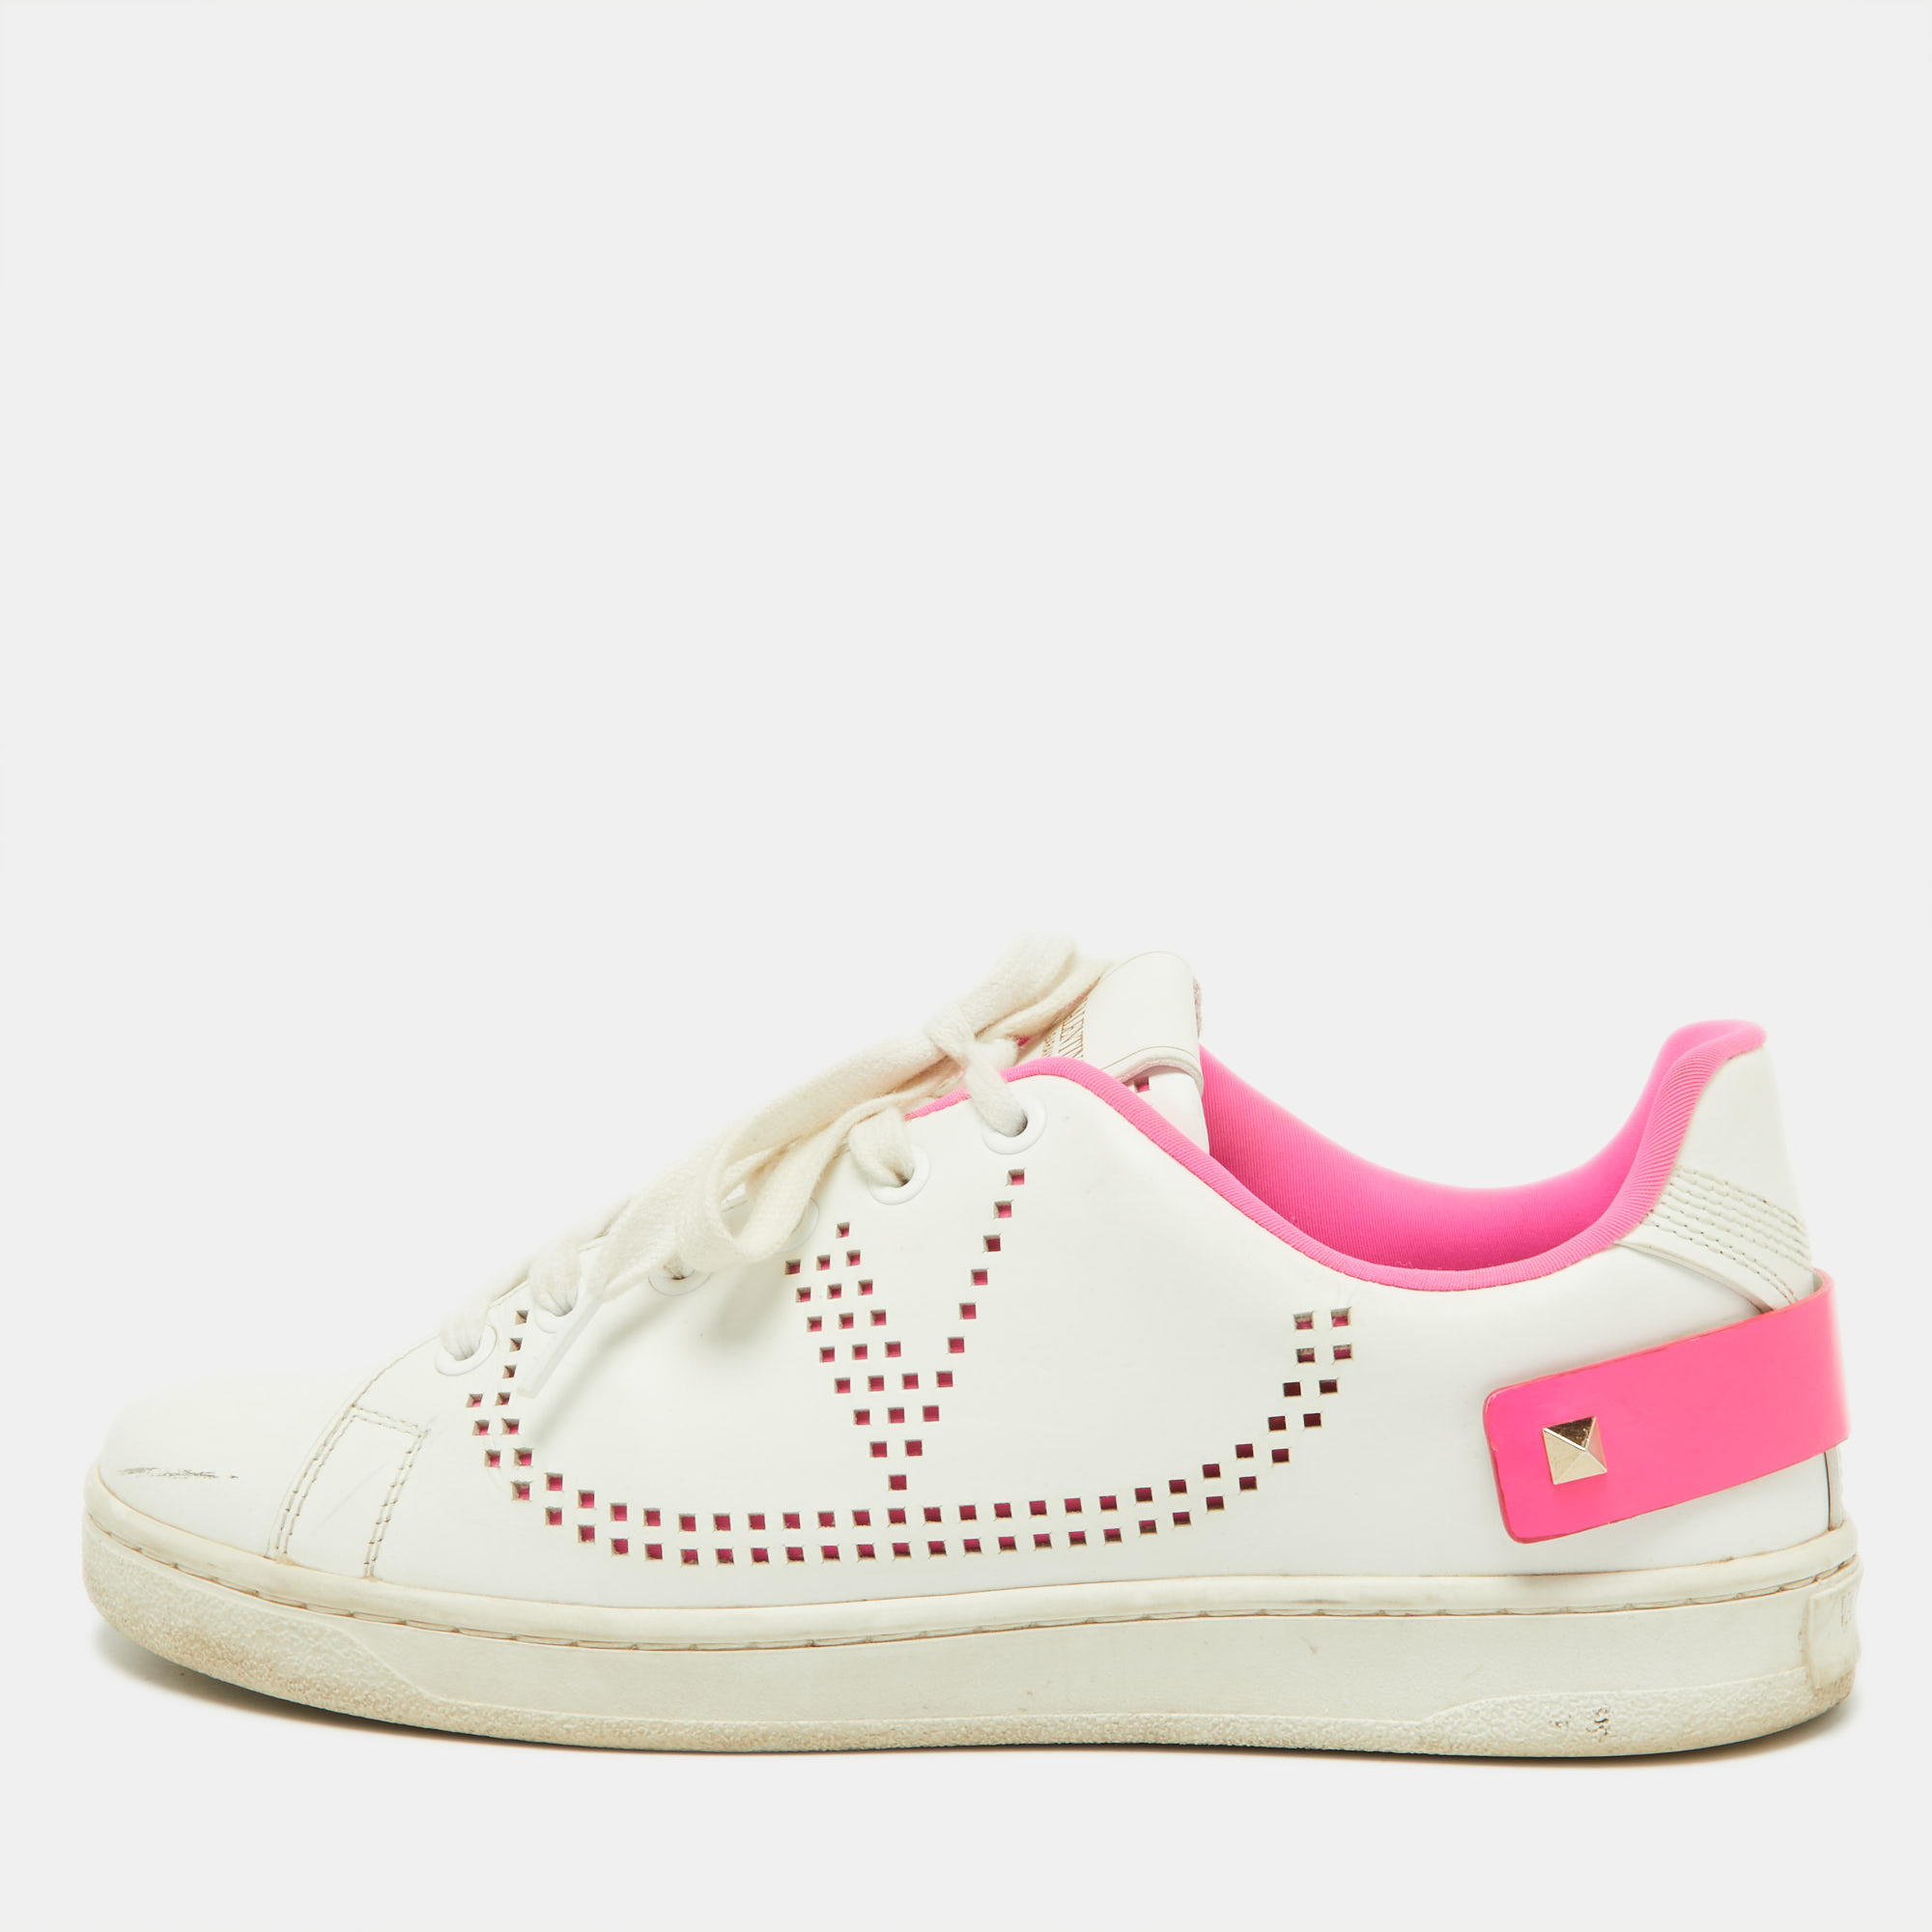 Valentino white leather vlogo rockstud low top sneakers size 36